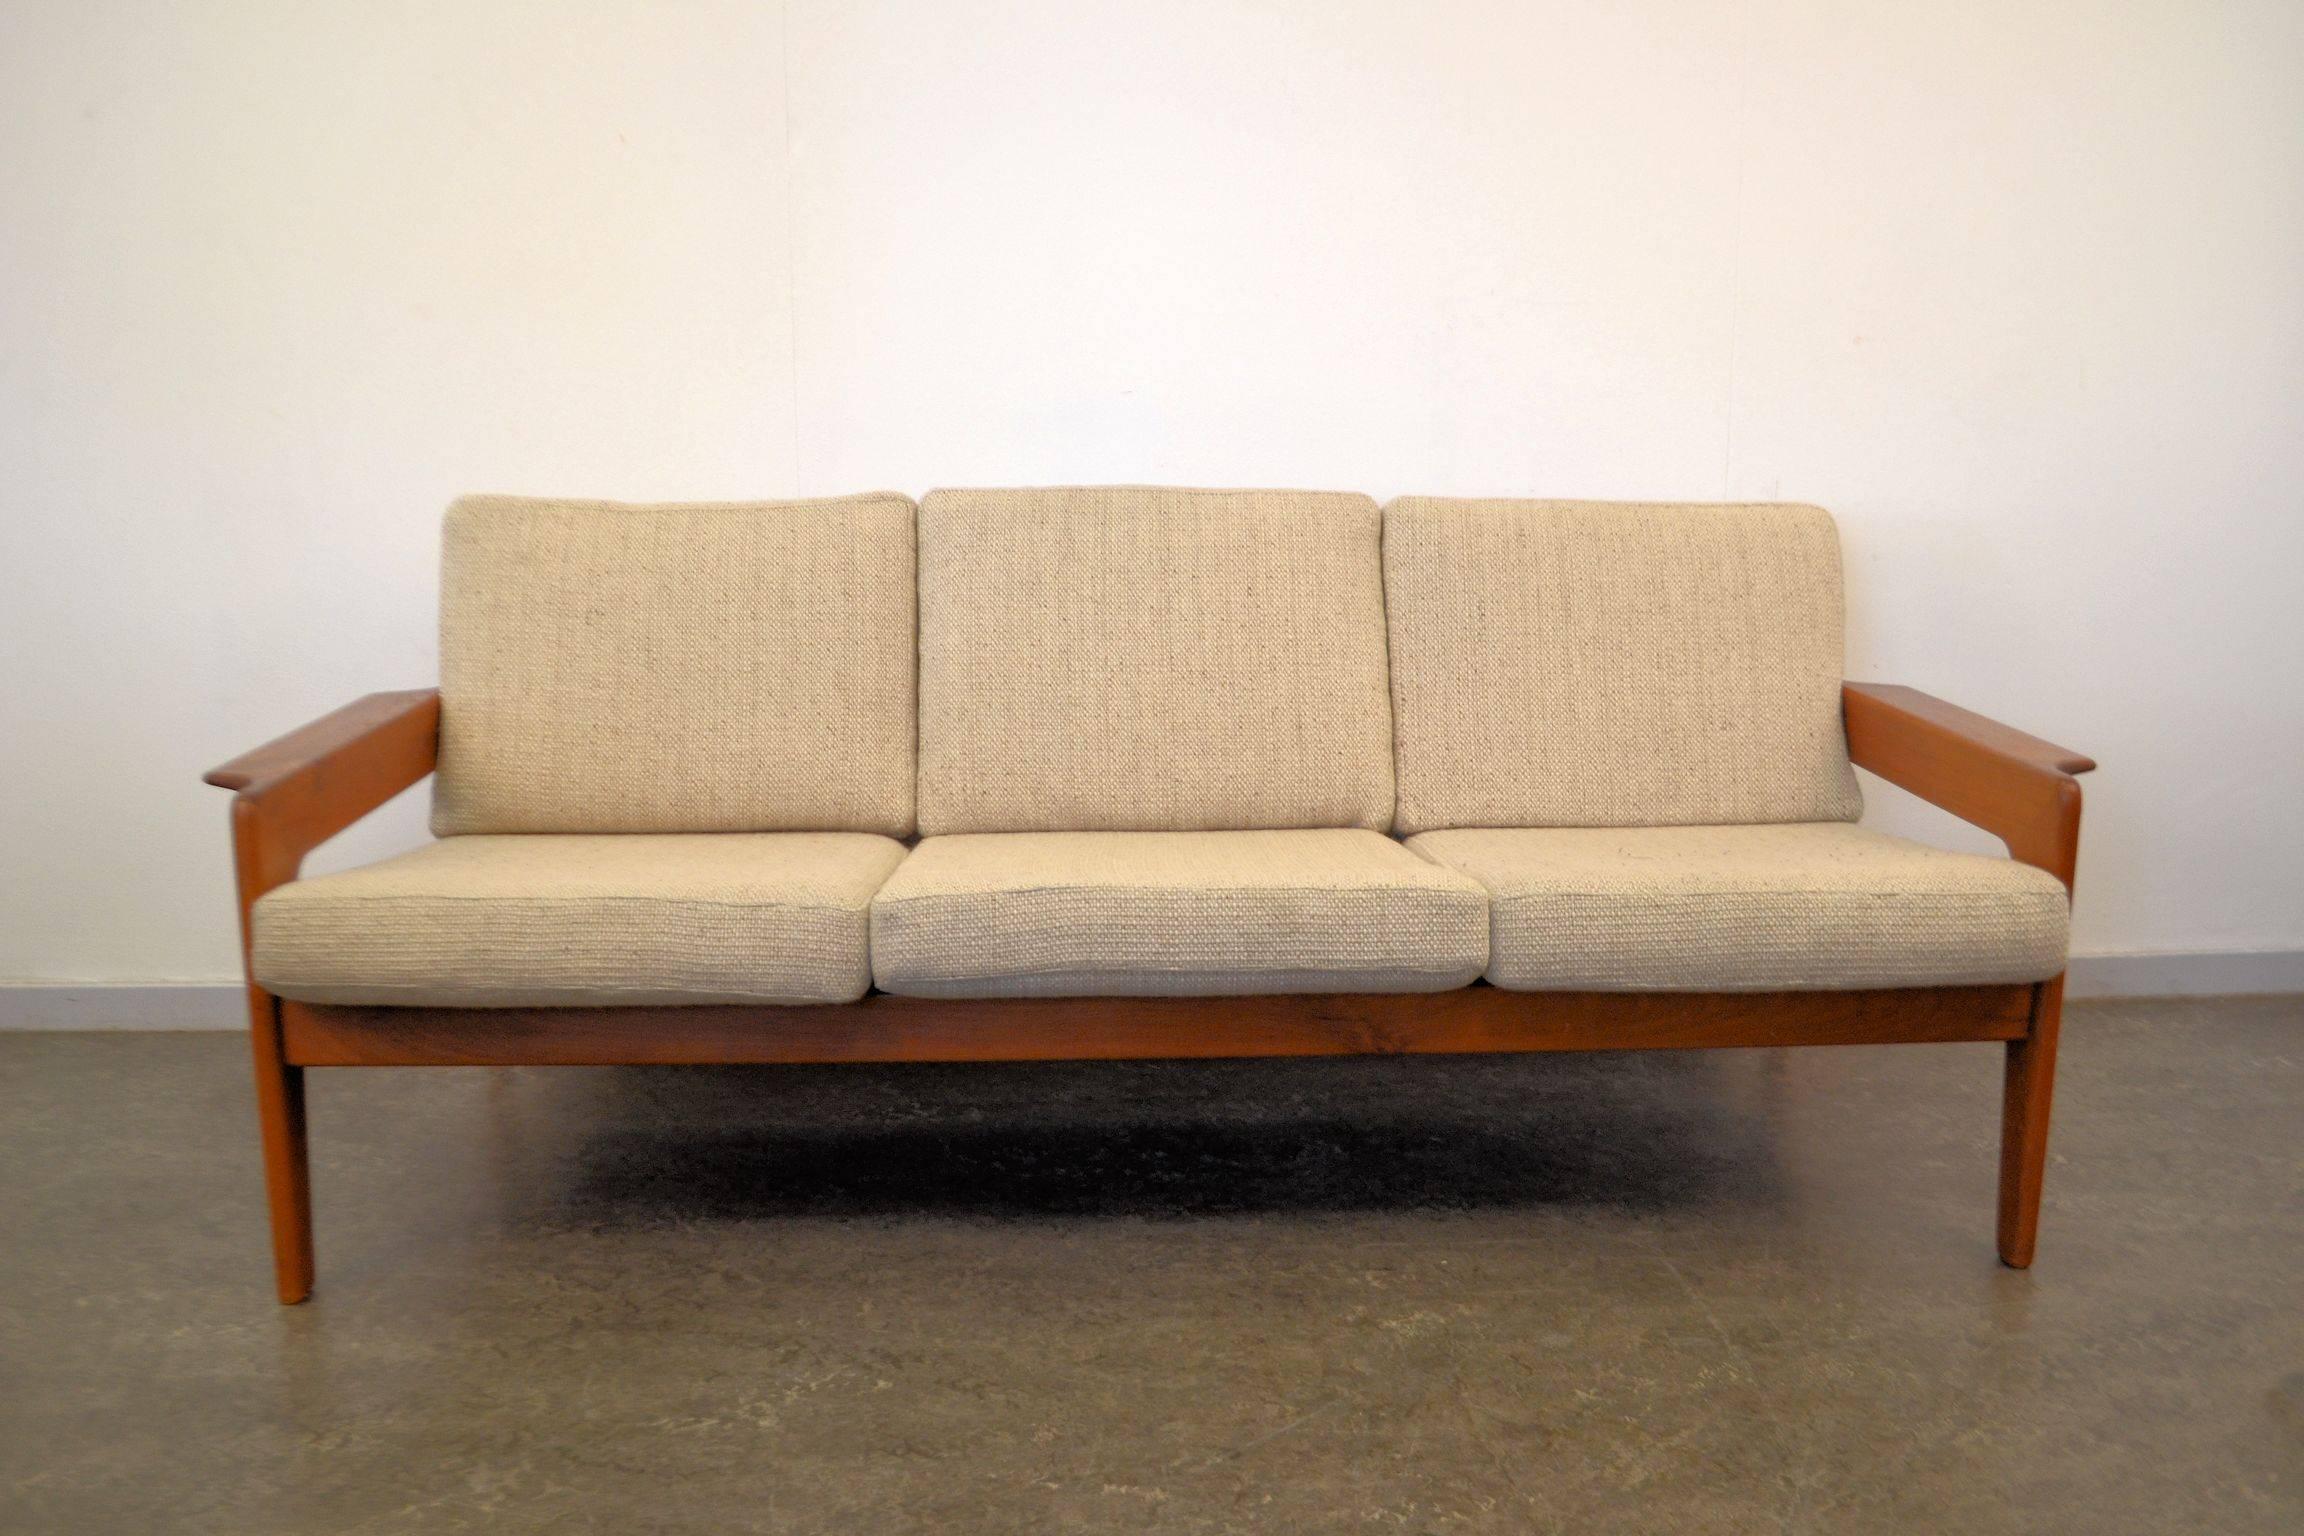 Danish modern three-seat sofa designed by Danish designer Arne Wahl Iversen. The sofa features a solid teak frame and most likely its original creme wool upholstery. We’ve had the webbing replaced to ensure many years of seating comfort. Super